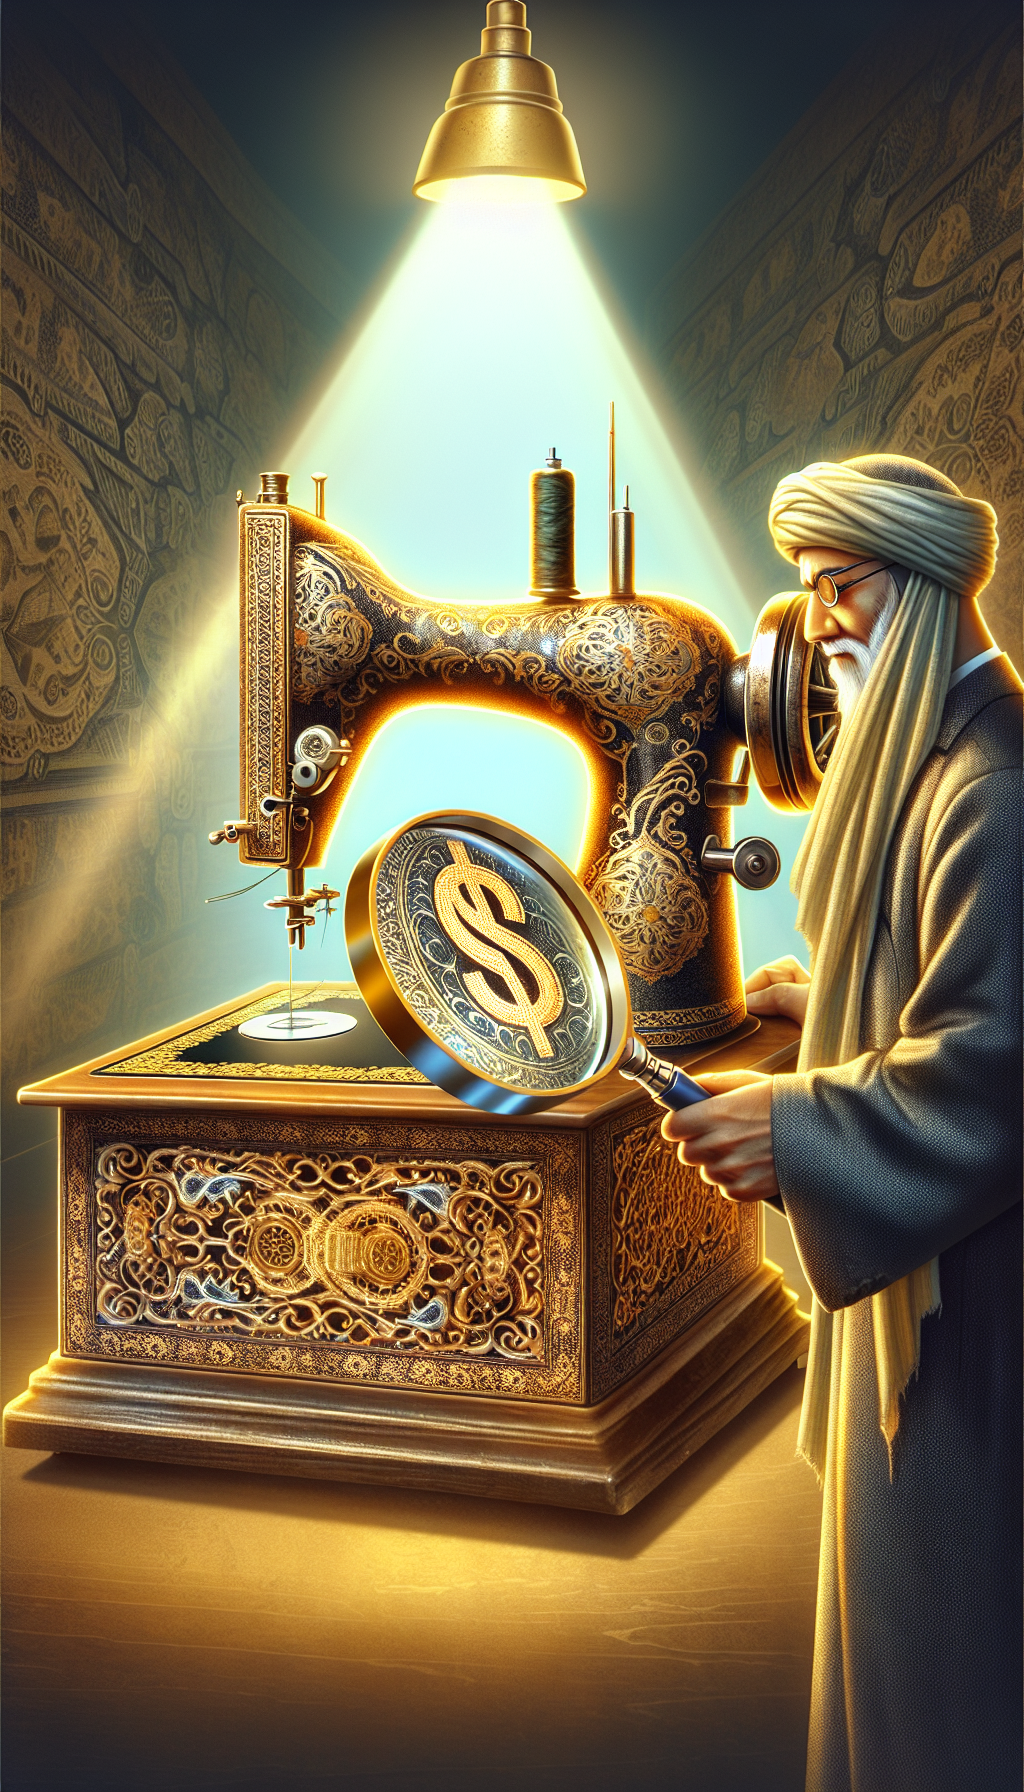 An illustrated tableau displays an antiquarian appraiser peering through a magnifying glass at a gleaming, ornate antique Singer sewing machine, with dollar signs subtly embedded in its intricate filigree. The machine rests atop a pedestal, under a spotlight, as if in a museum, while a palette of gold and silver hues subtly suggests its high worth and timeless craftsmanship.